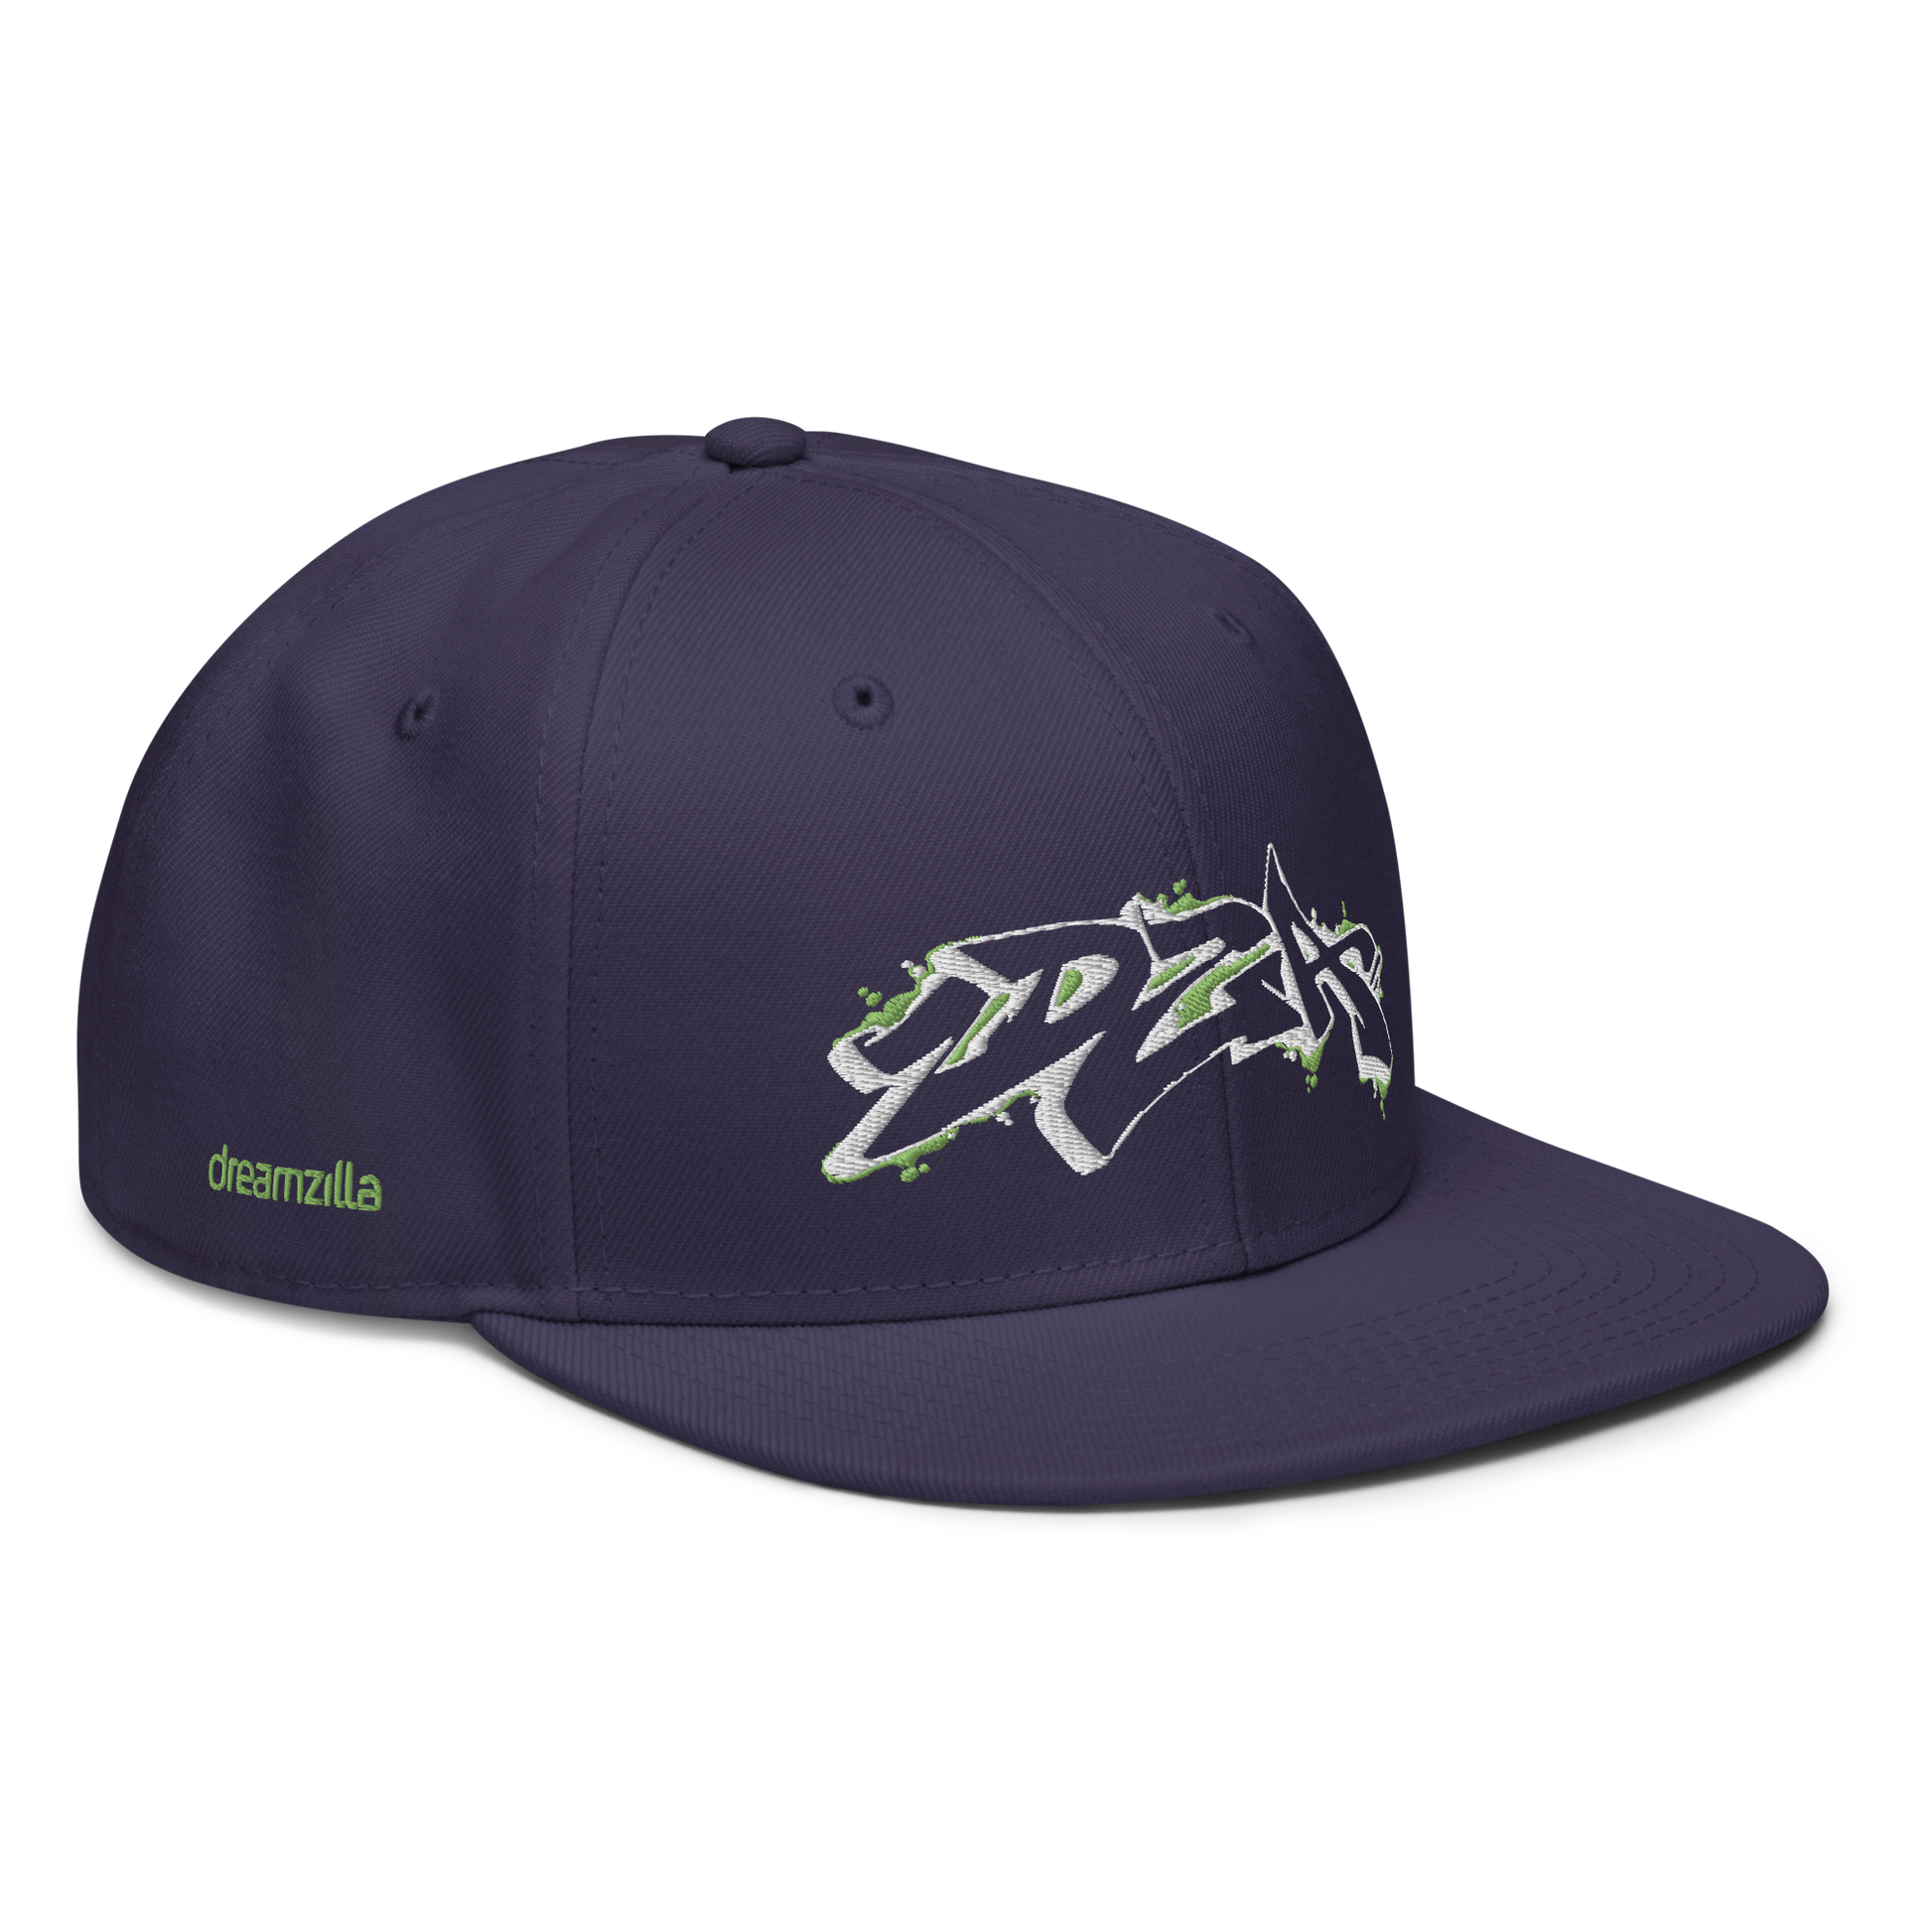 Angled view of Graffiti DZA Snapback by Sanitor in Navy Blue